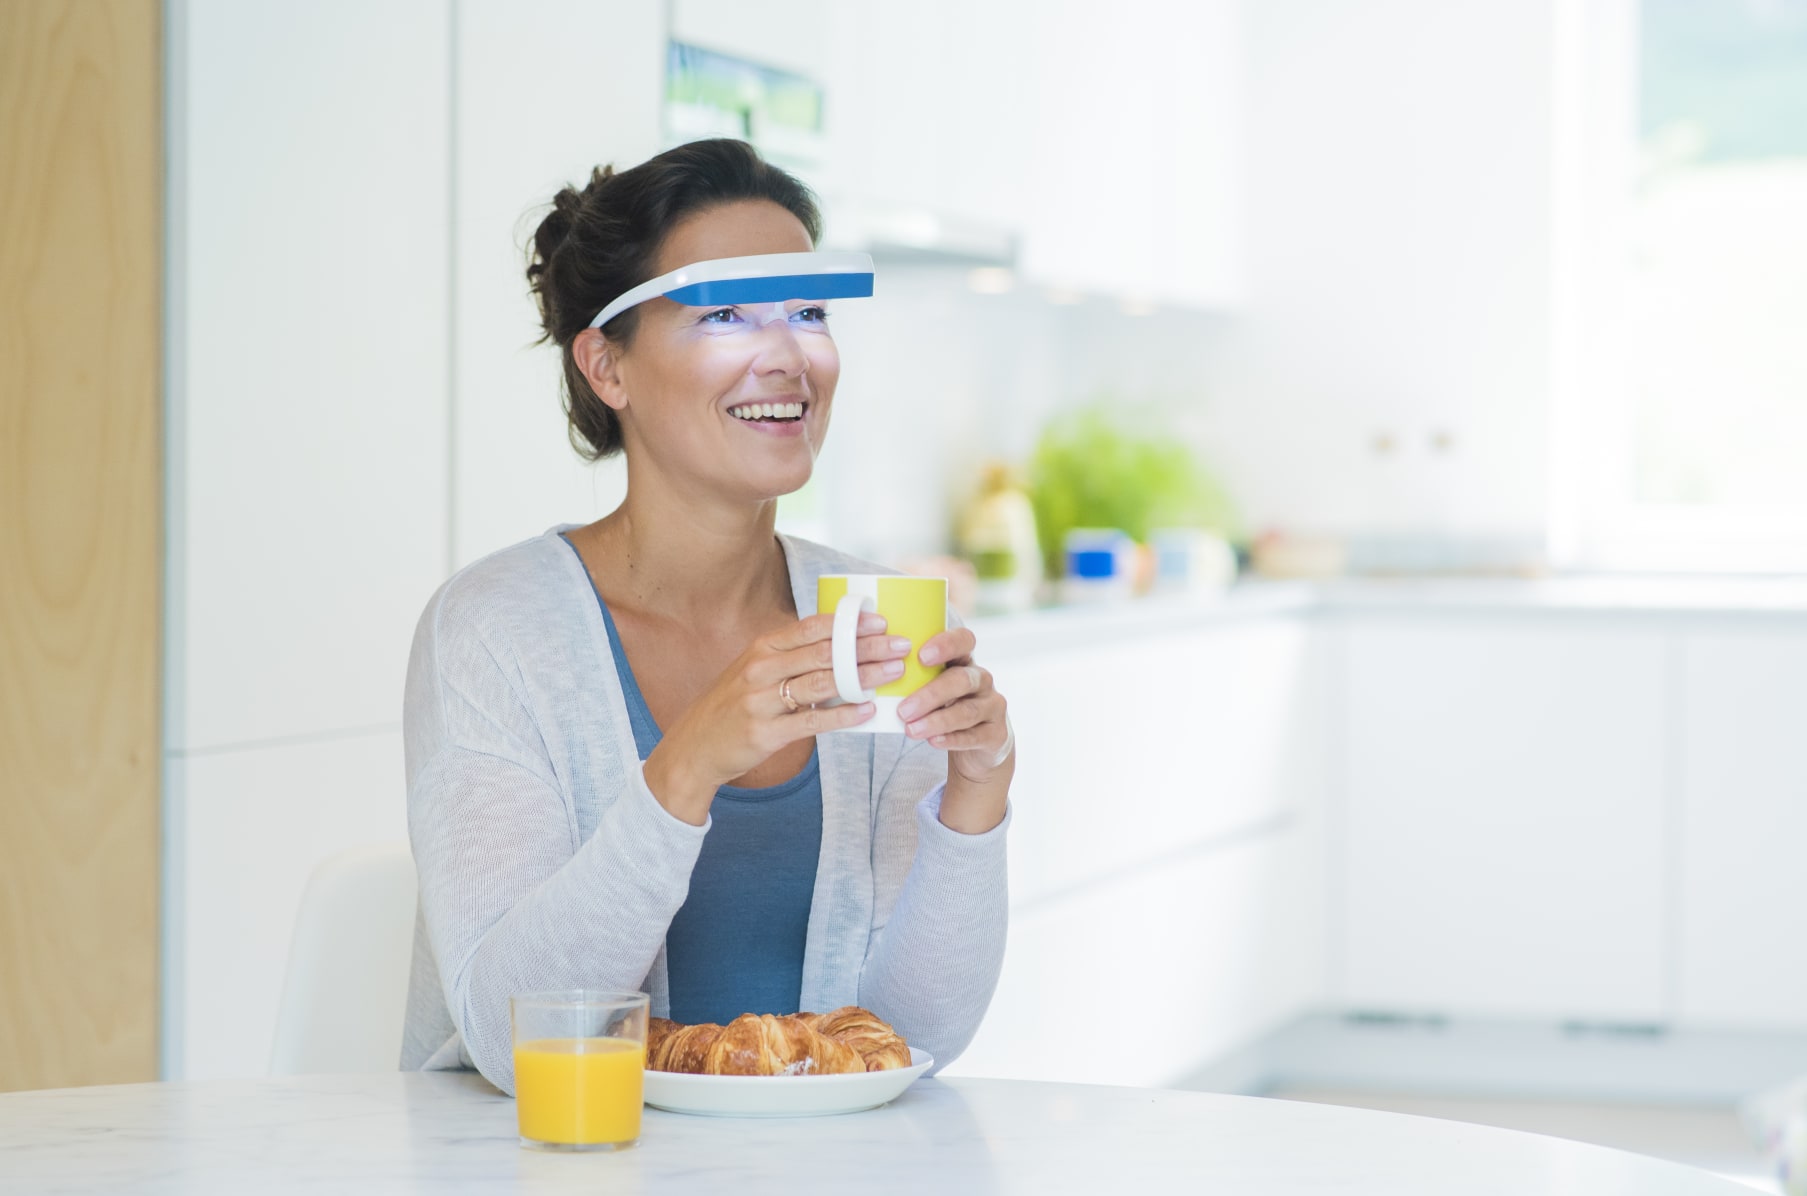 LUMINETTE 3 : World's #1 Light Therapy Glasses